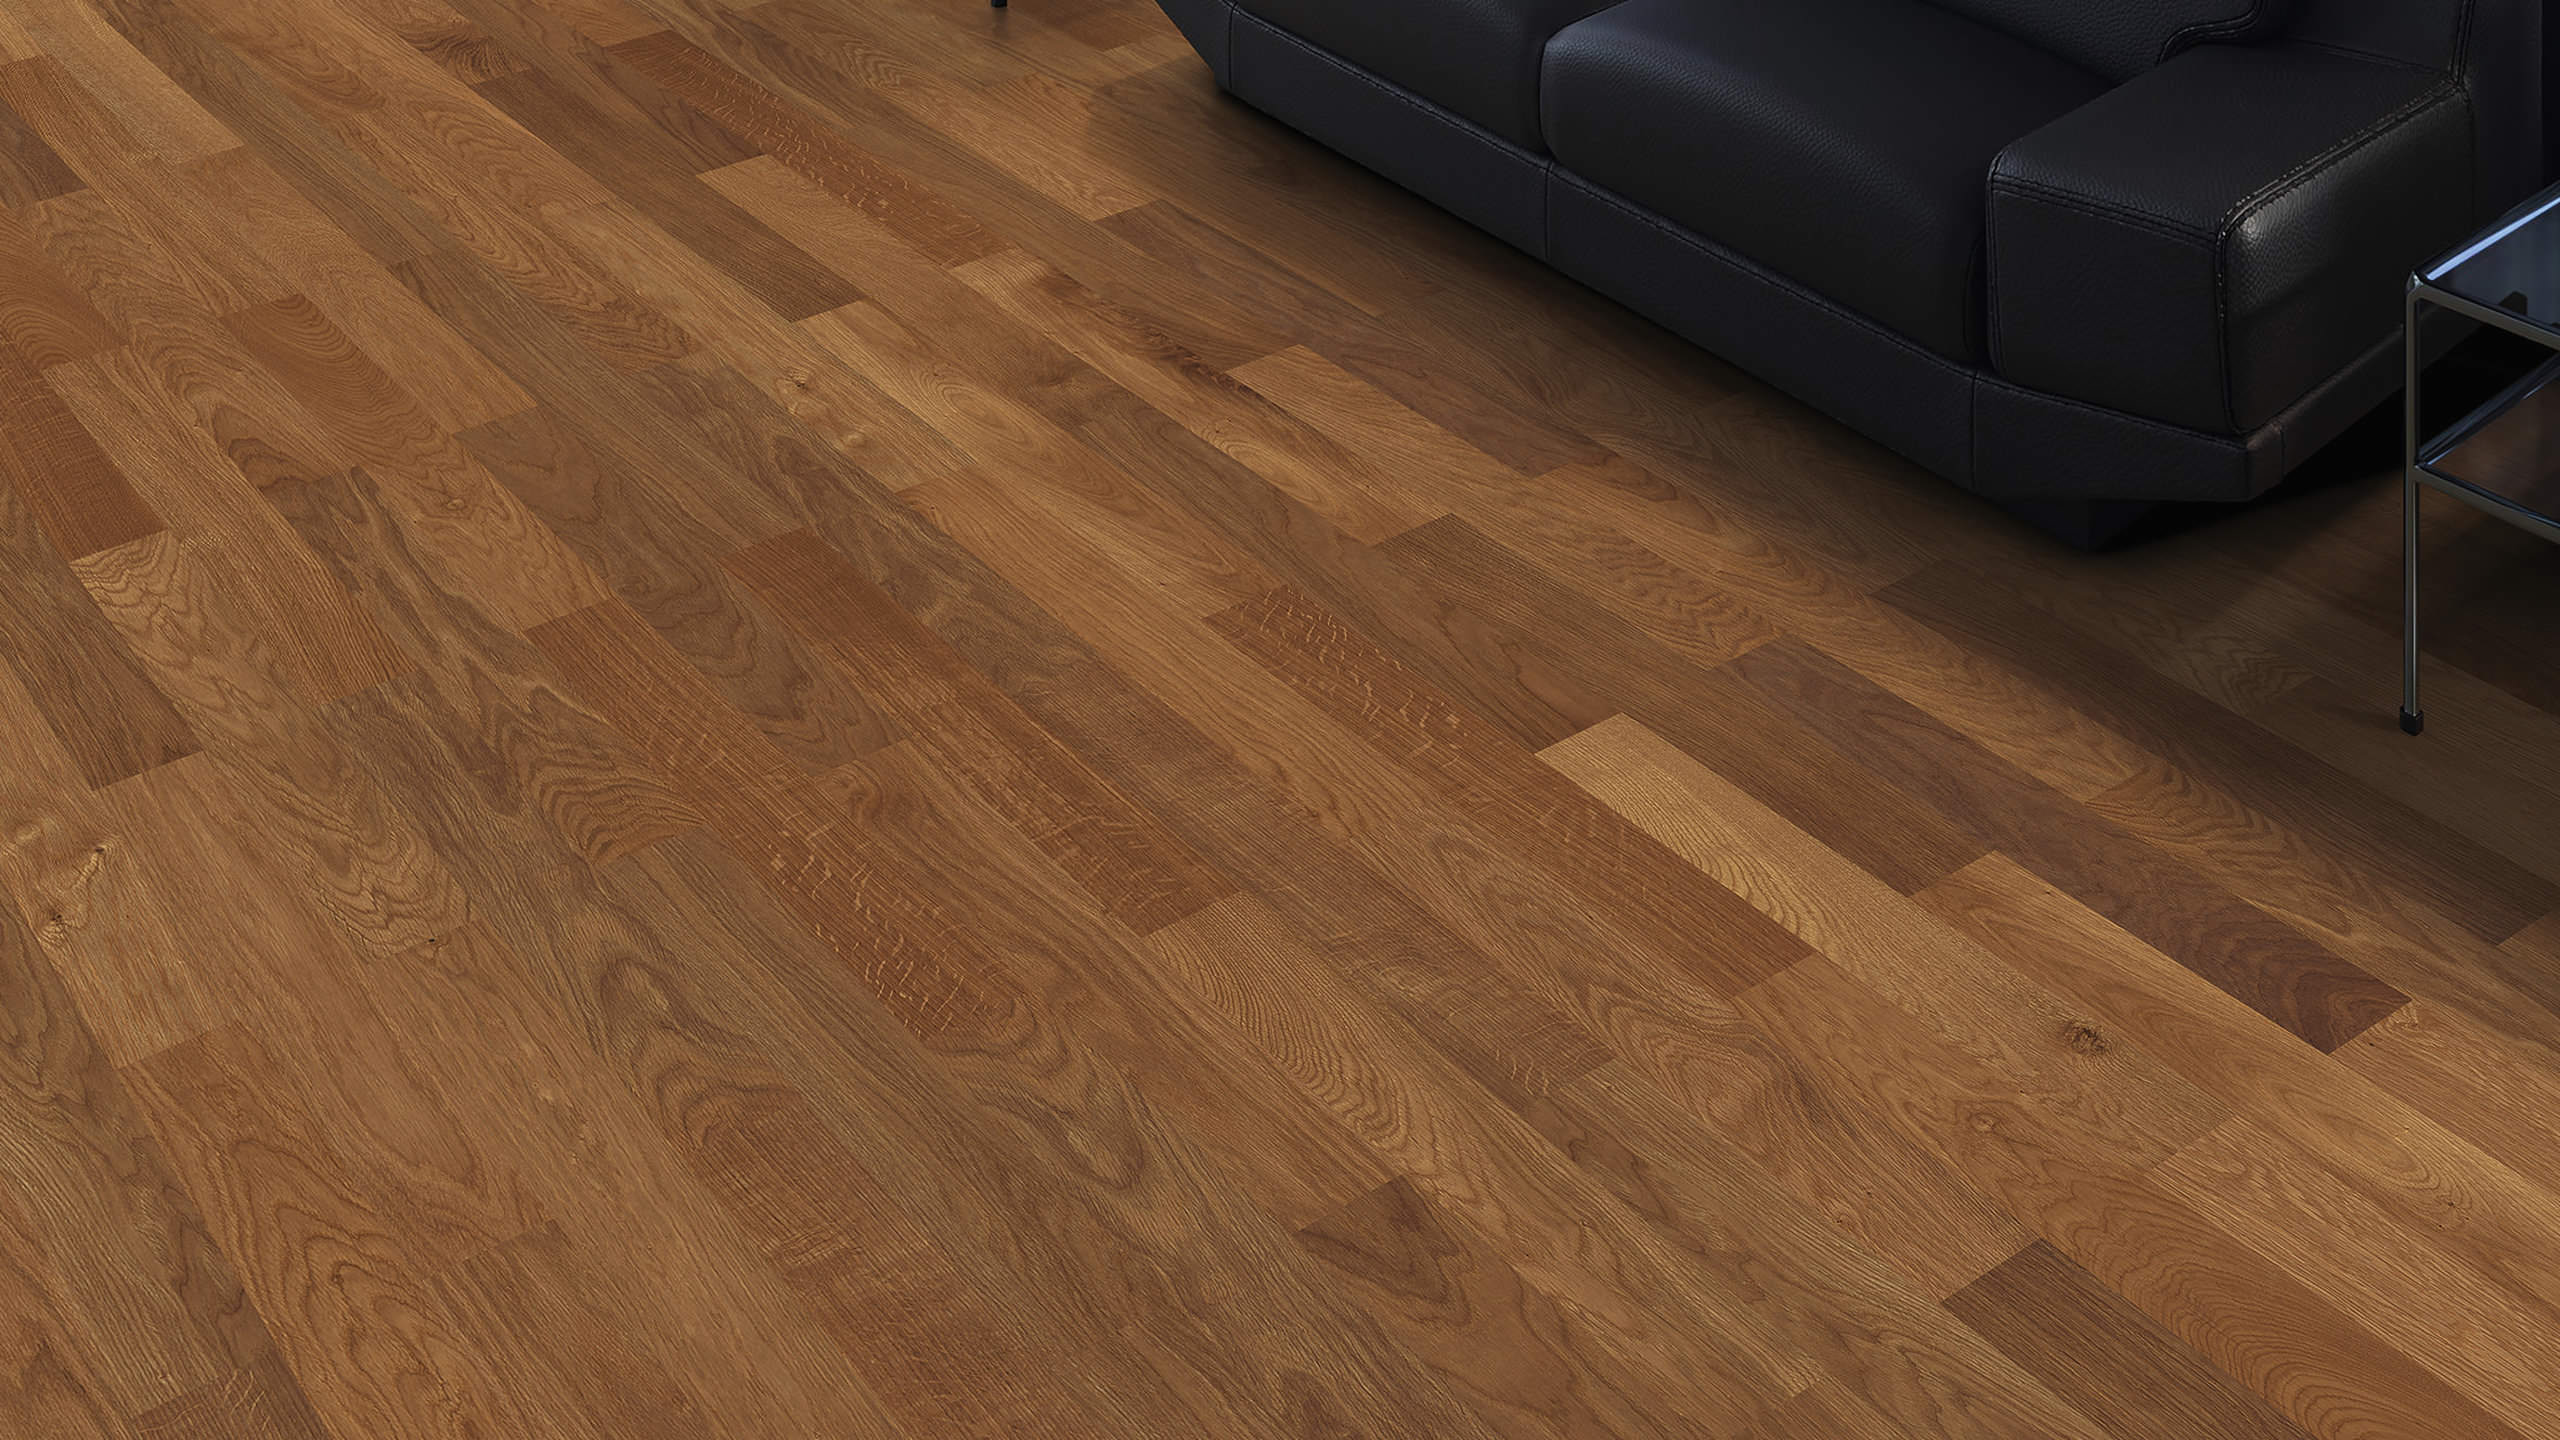 HARO PARQUET 4000 Strip Classico Smoked Oak Trend brushed naturaLin plus Tongue and Groove